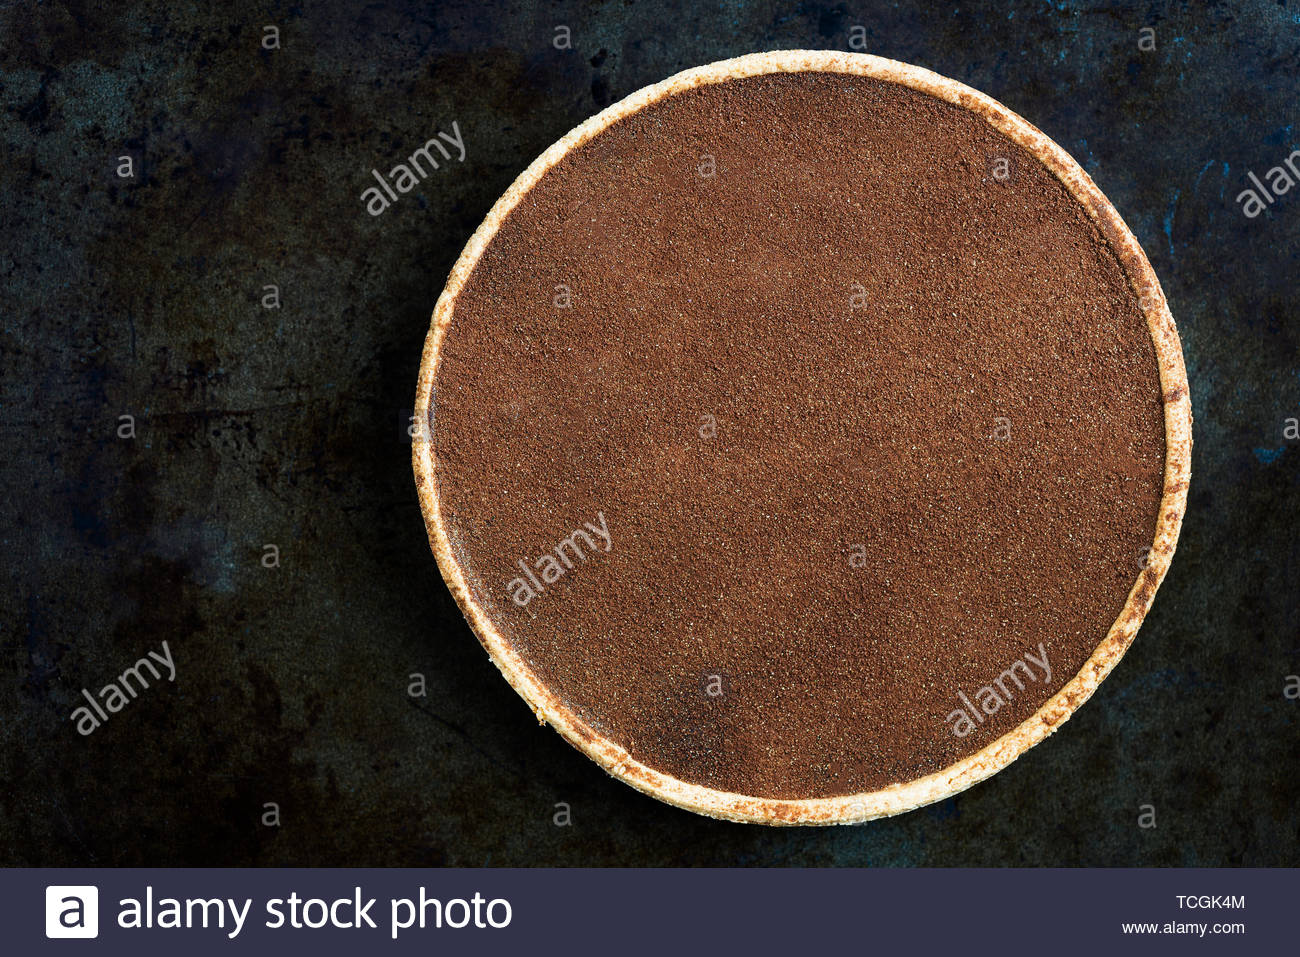 Pastry For Pie Stock Photos Image